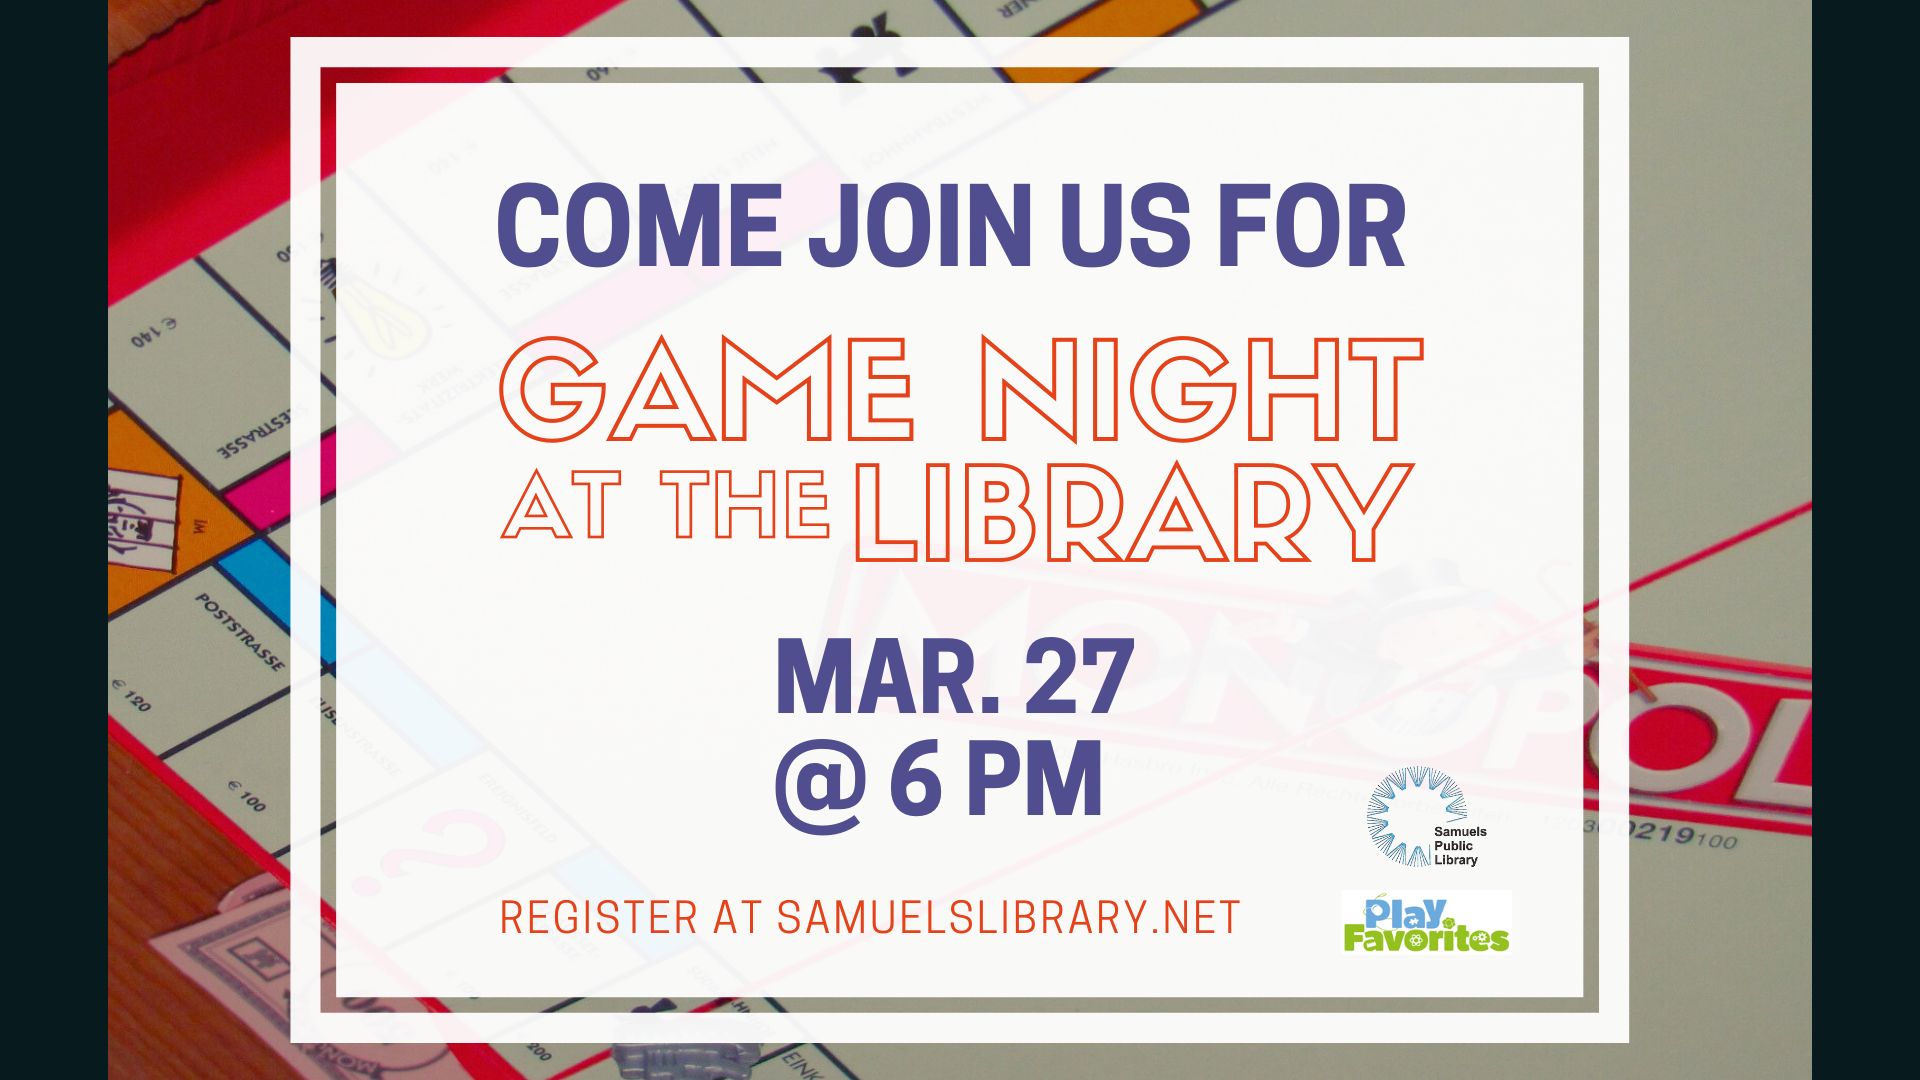 Come join us for Game night at the library! March 27th at 6 PM.